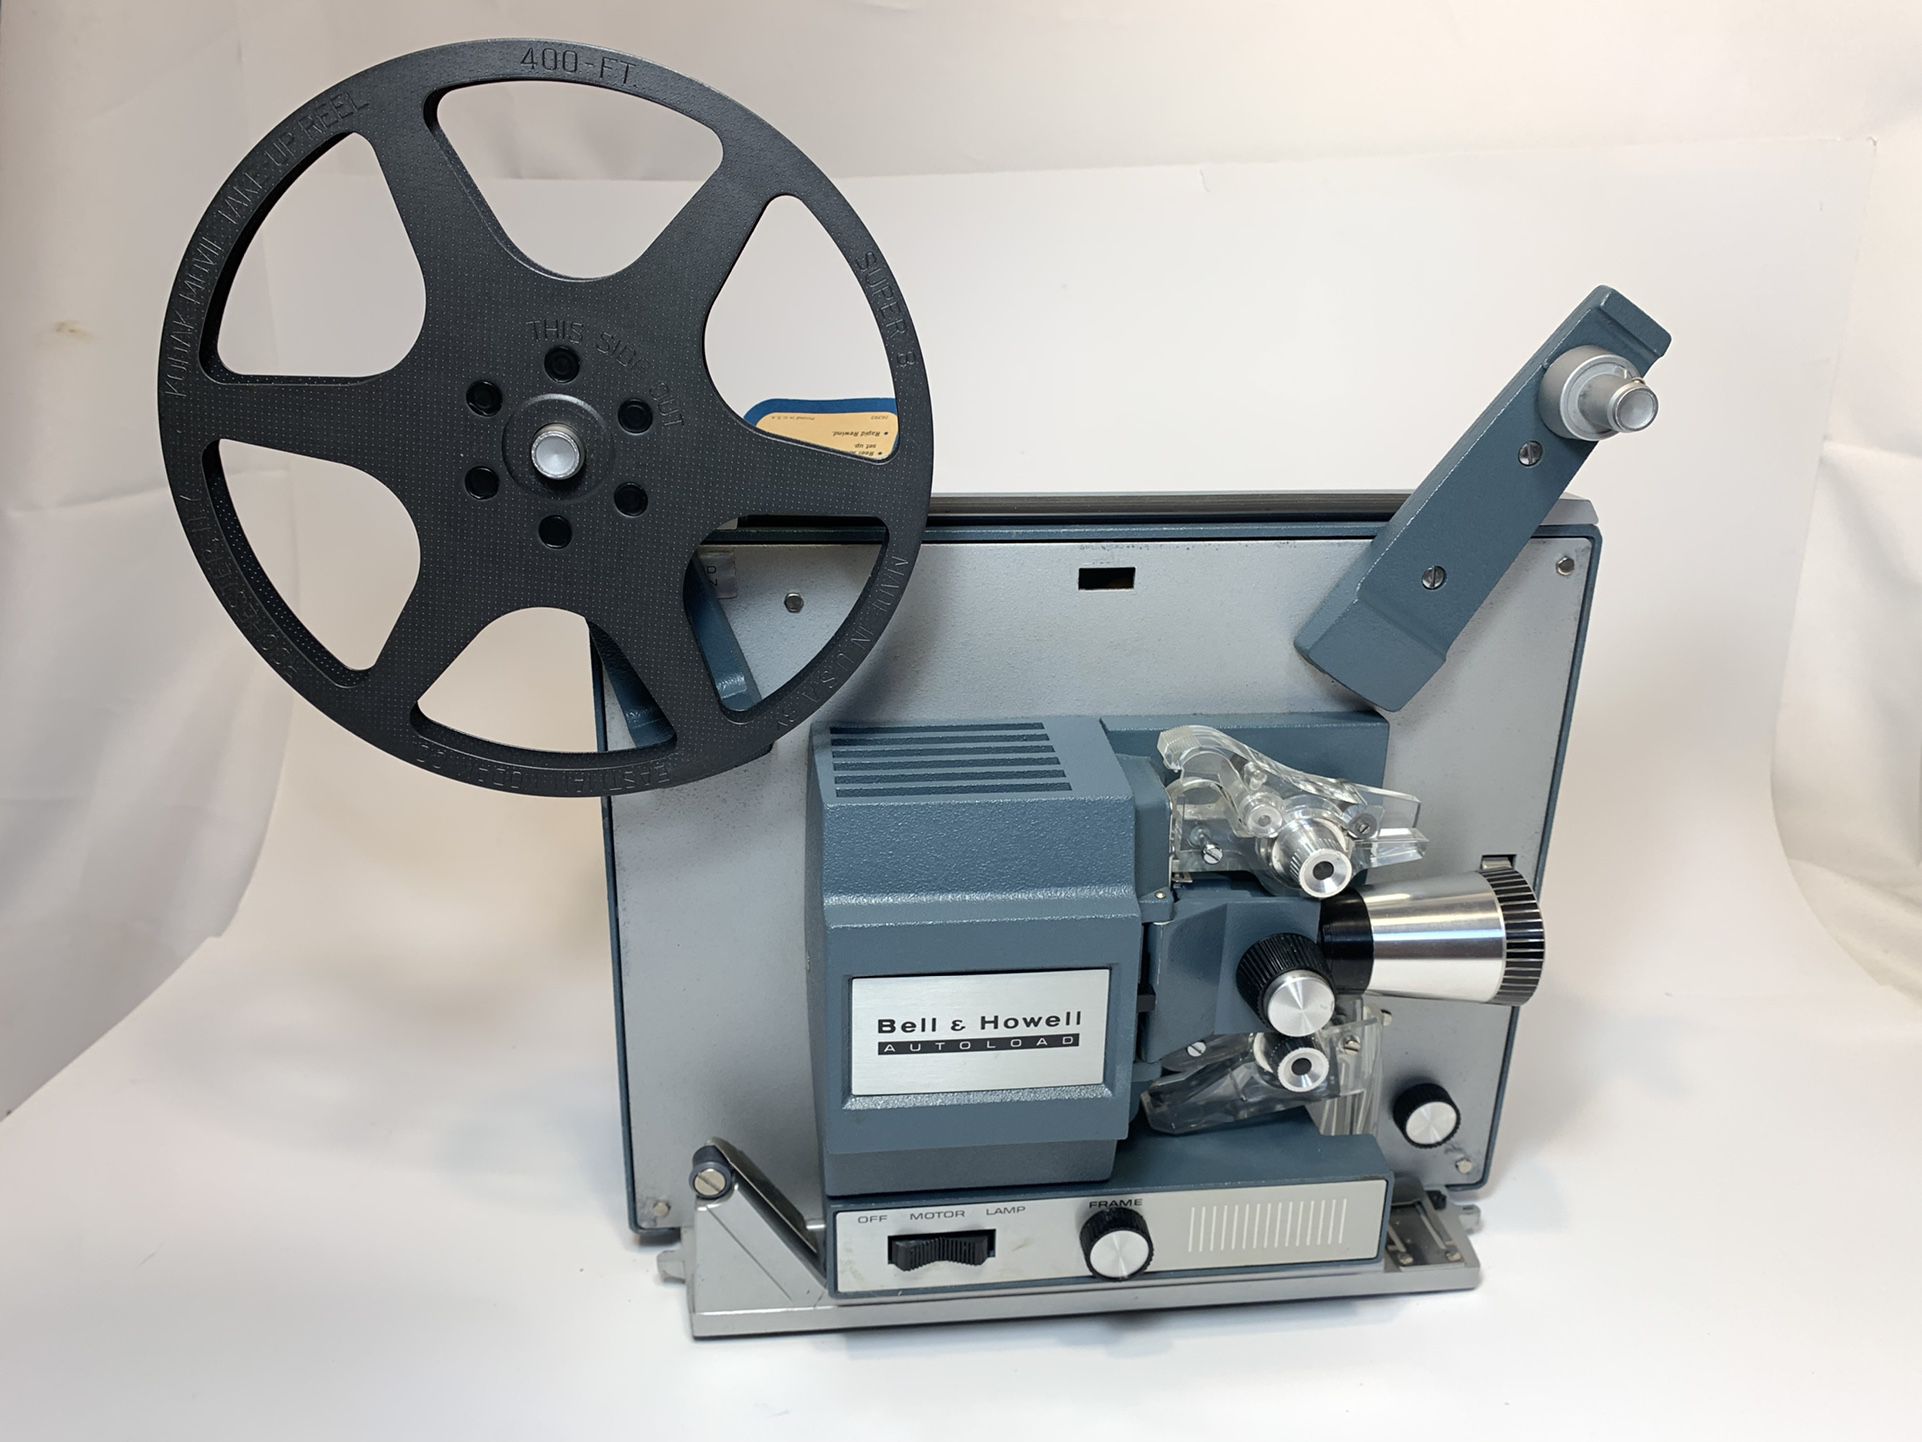 Super 8 Home Movie Projector 